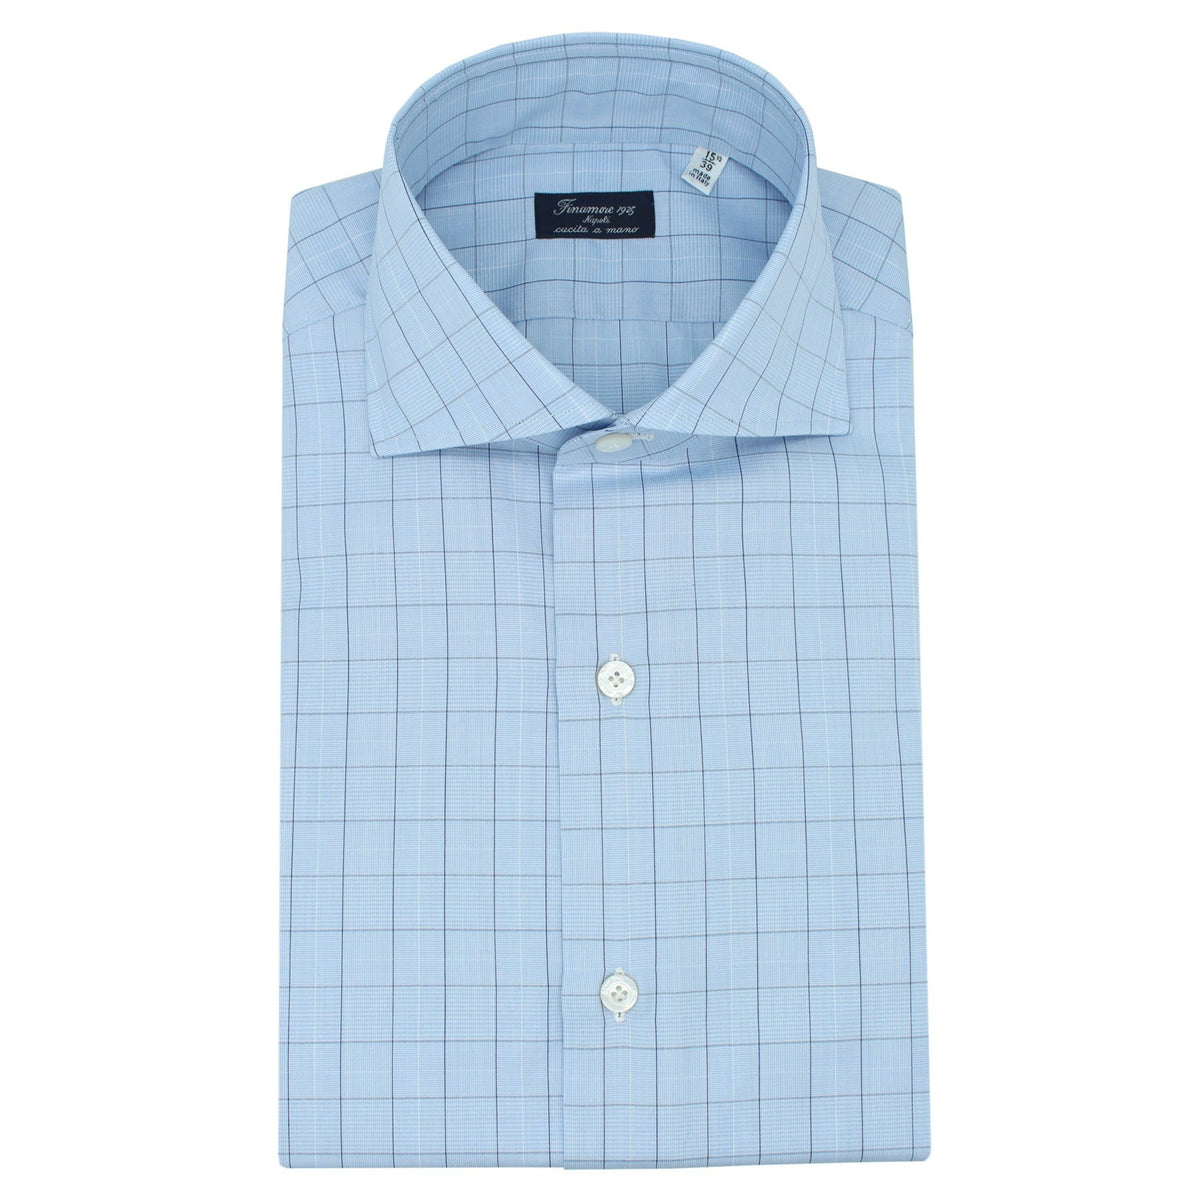 Classic Naples checked shirt with blue stripe